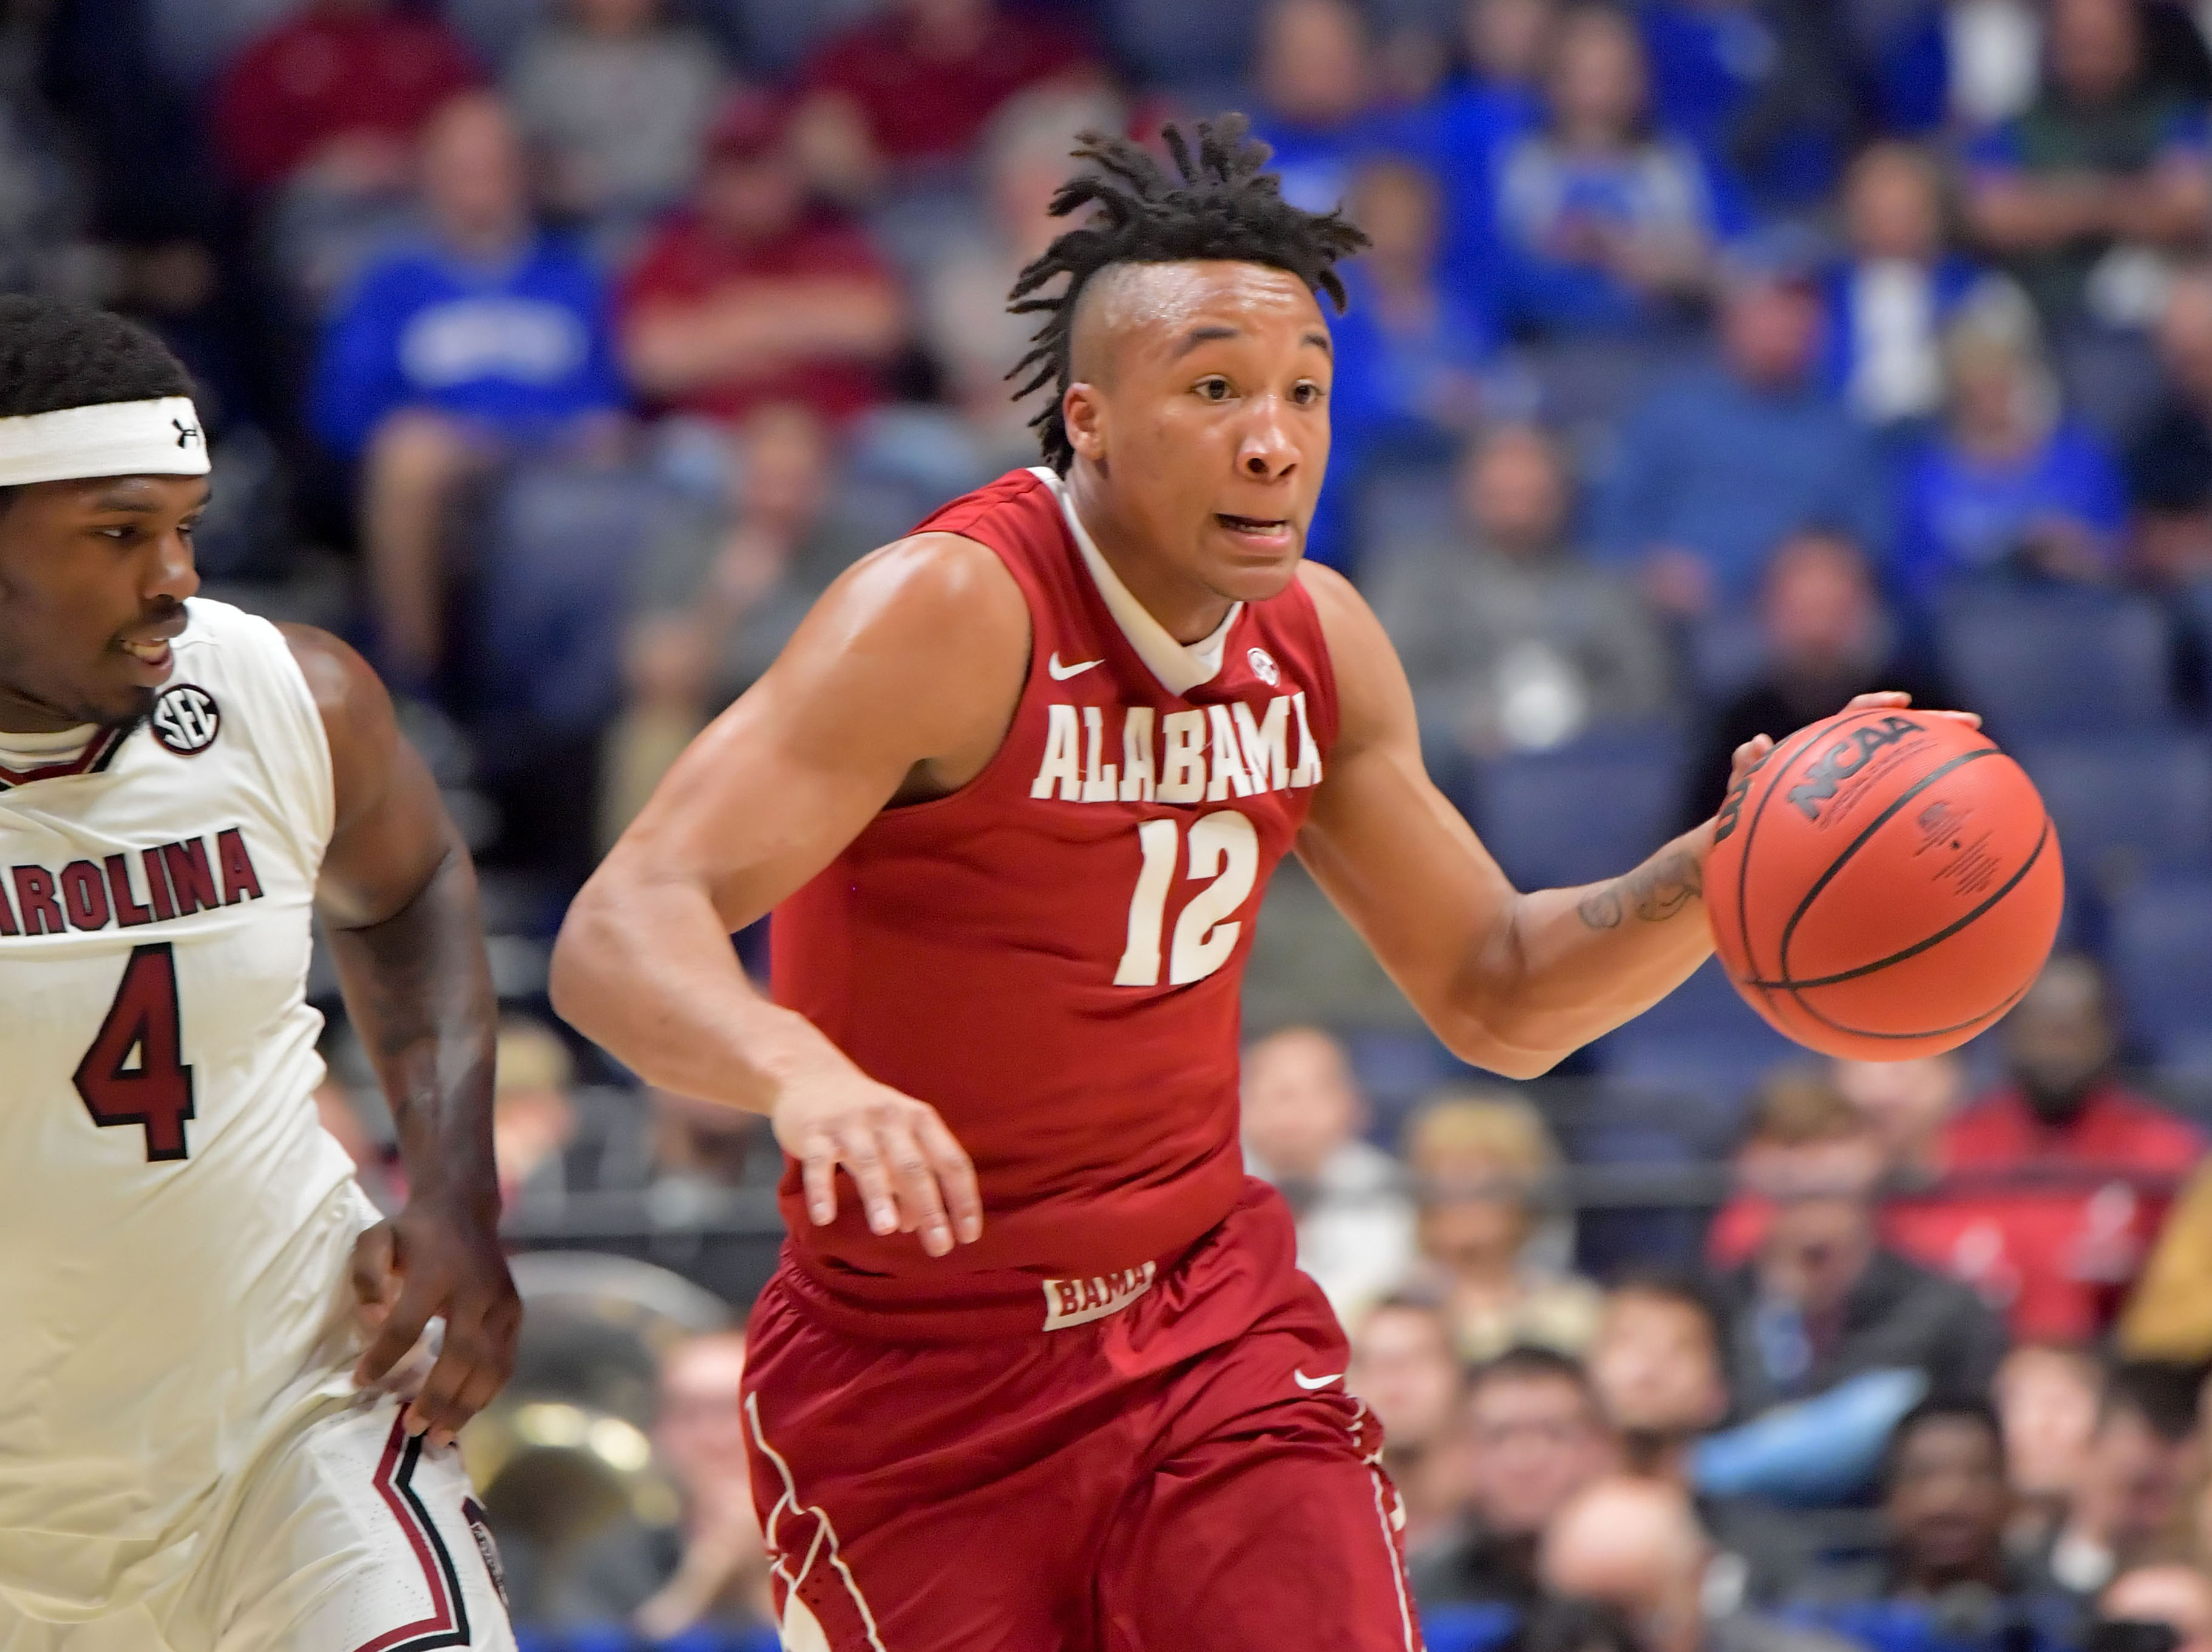 Alabama basketball won its second SEC tournament game Friday. How the